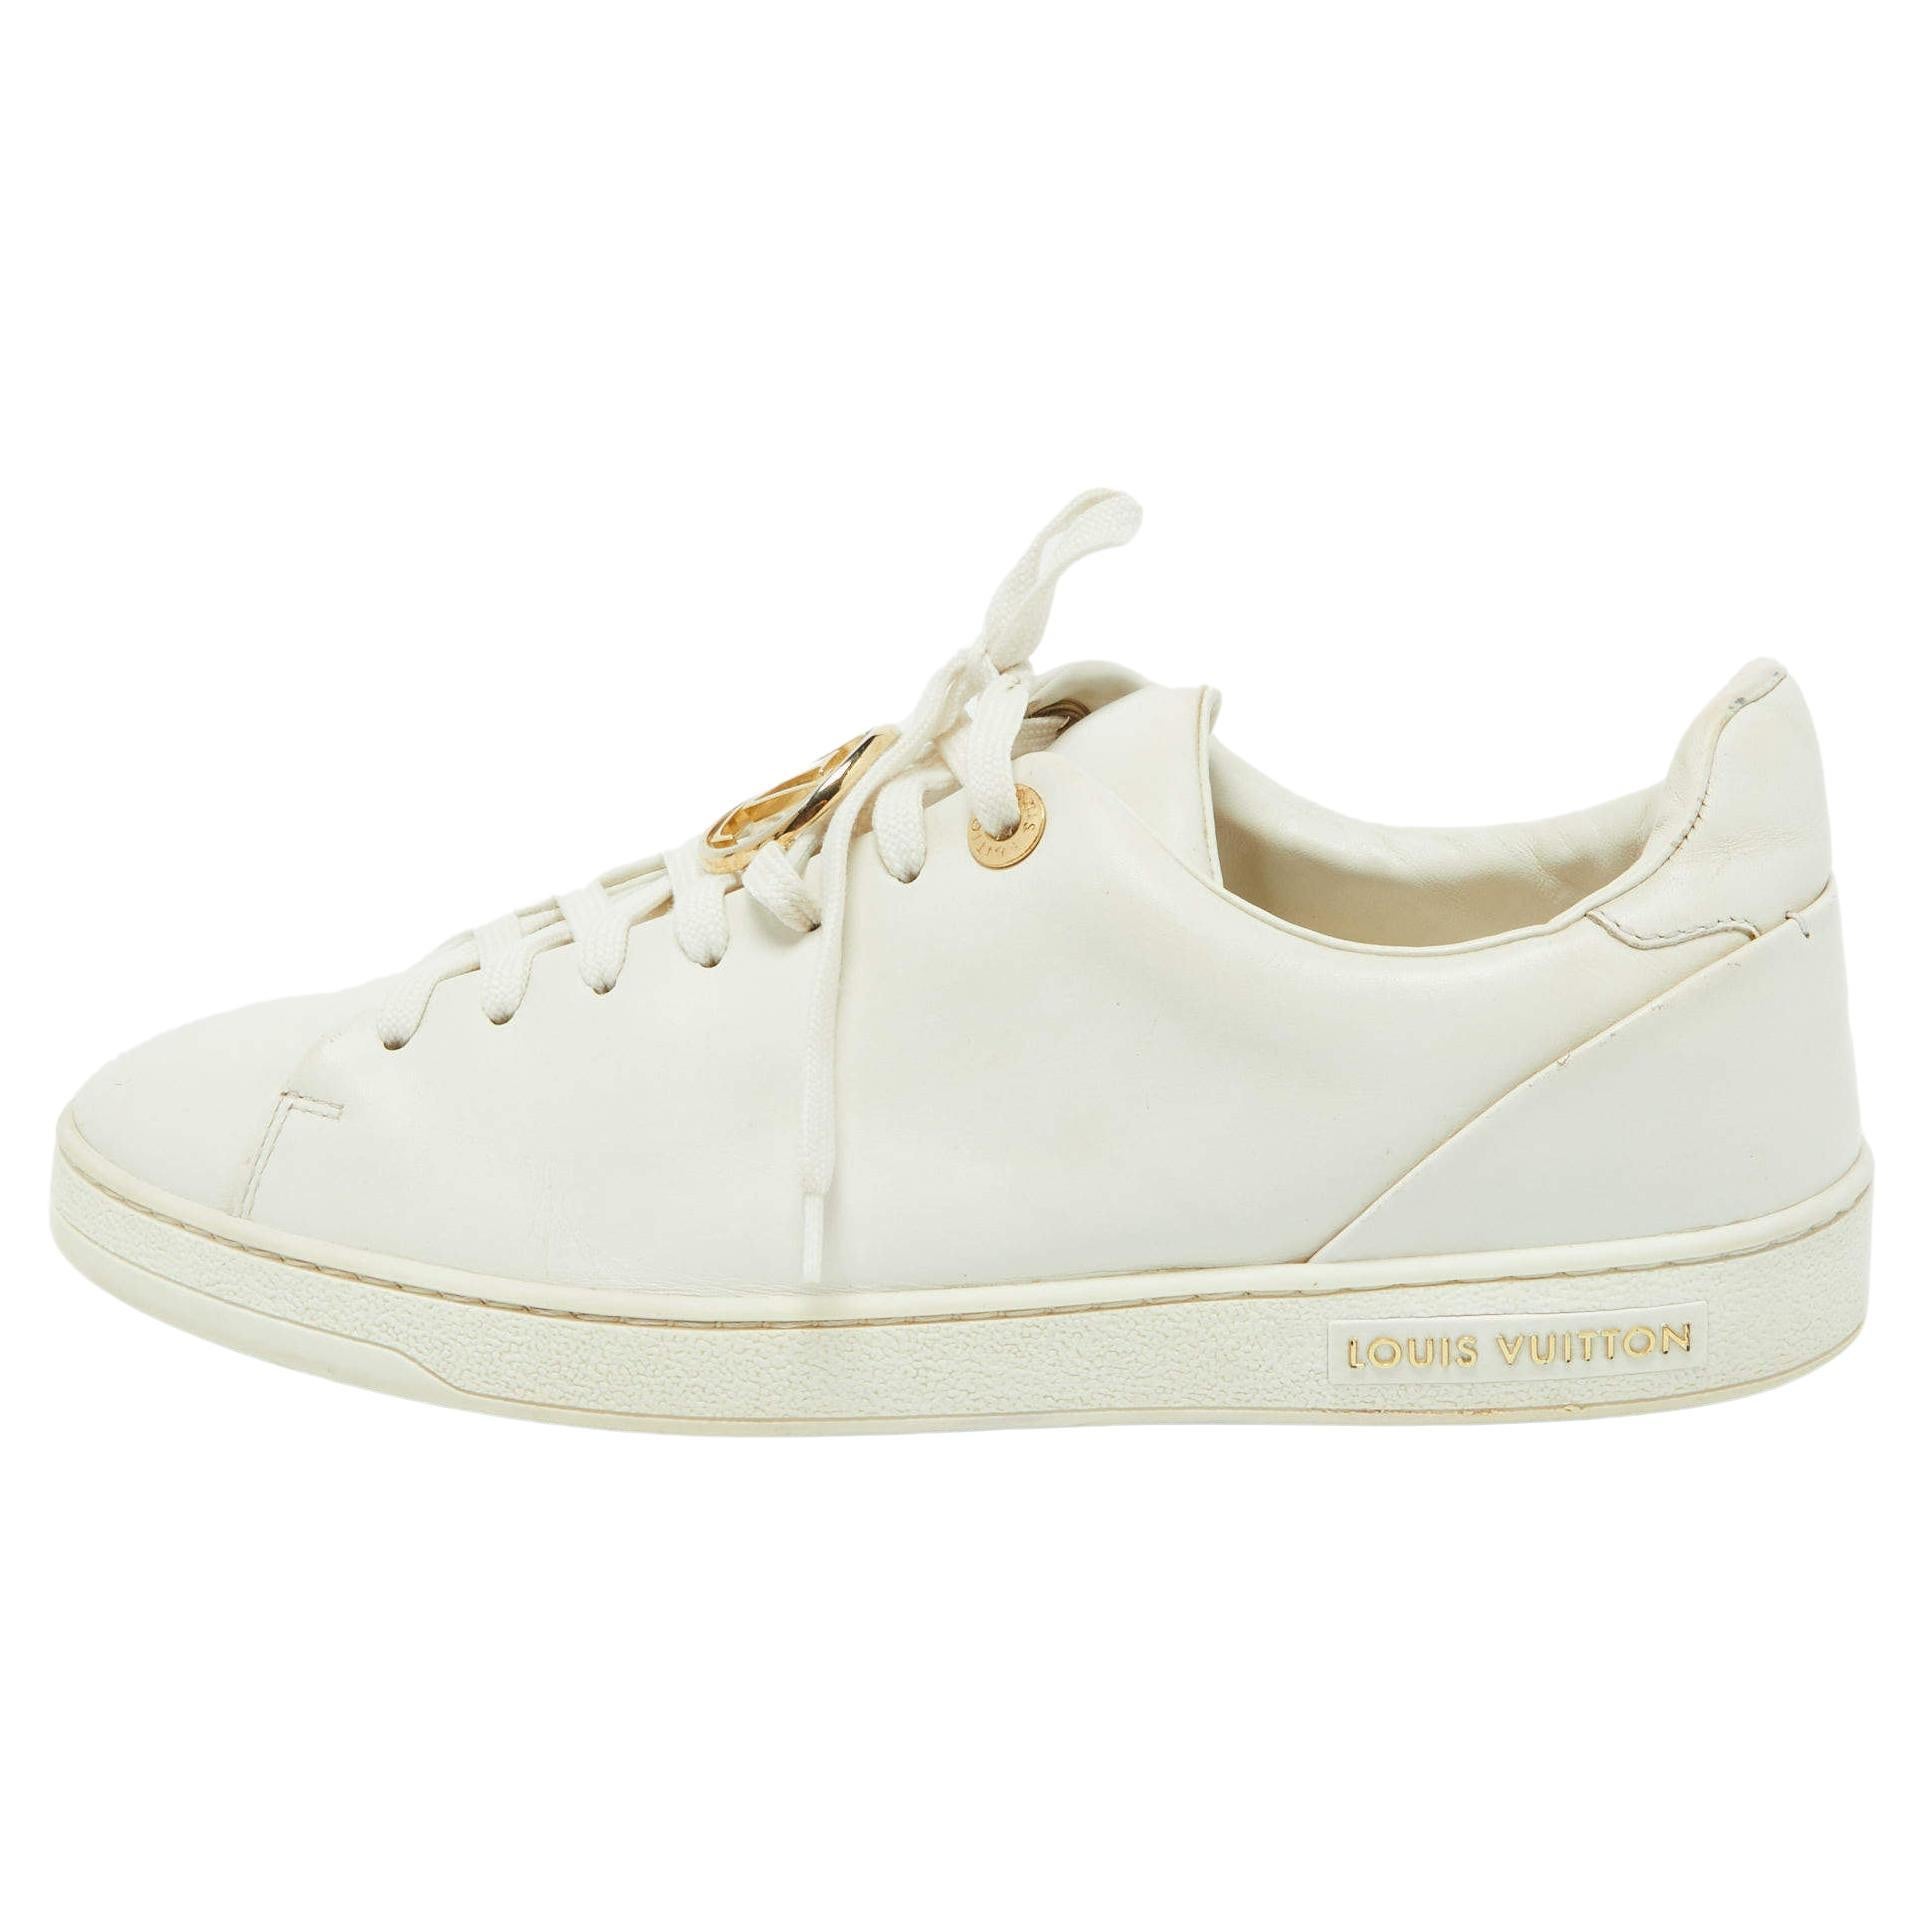 Louis Vuitton White Leather Frontrow Sneakers Size 39 For Sale